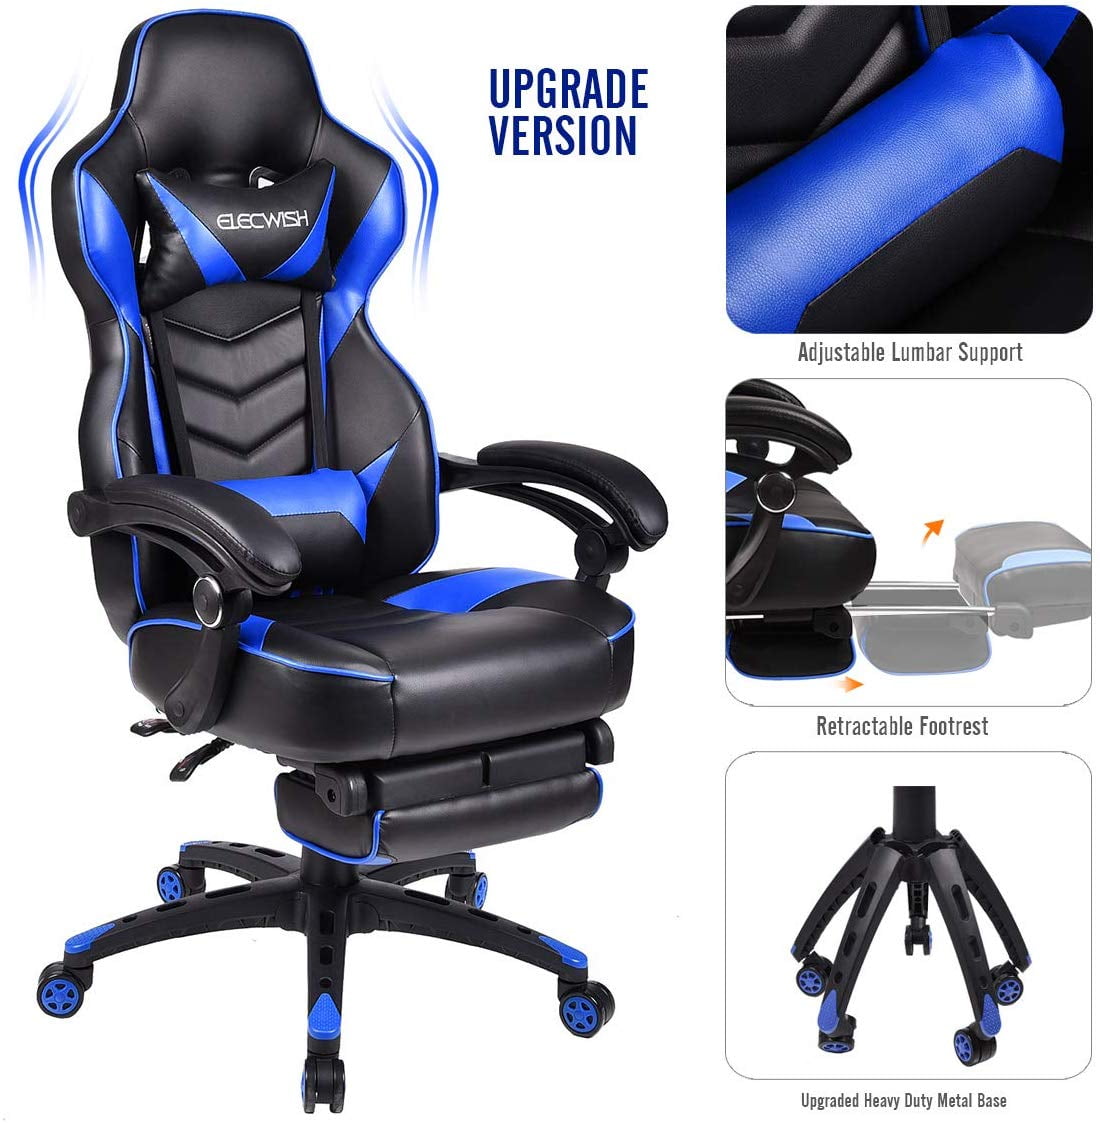 RACING GAMING OFFICE CHAIR EXECUTIVE LUMBAR SUPPORT SWIVEL PU LEATHER ADJUSTABLE 